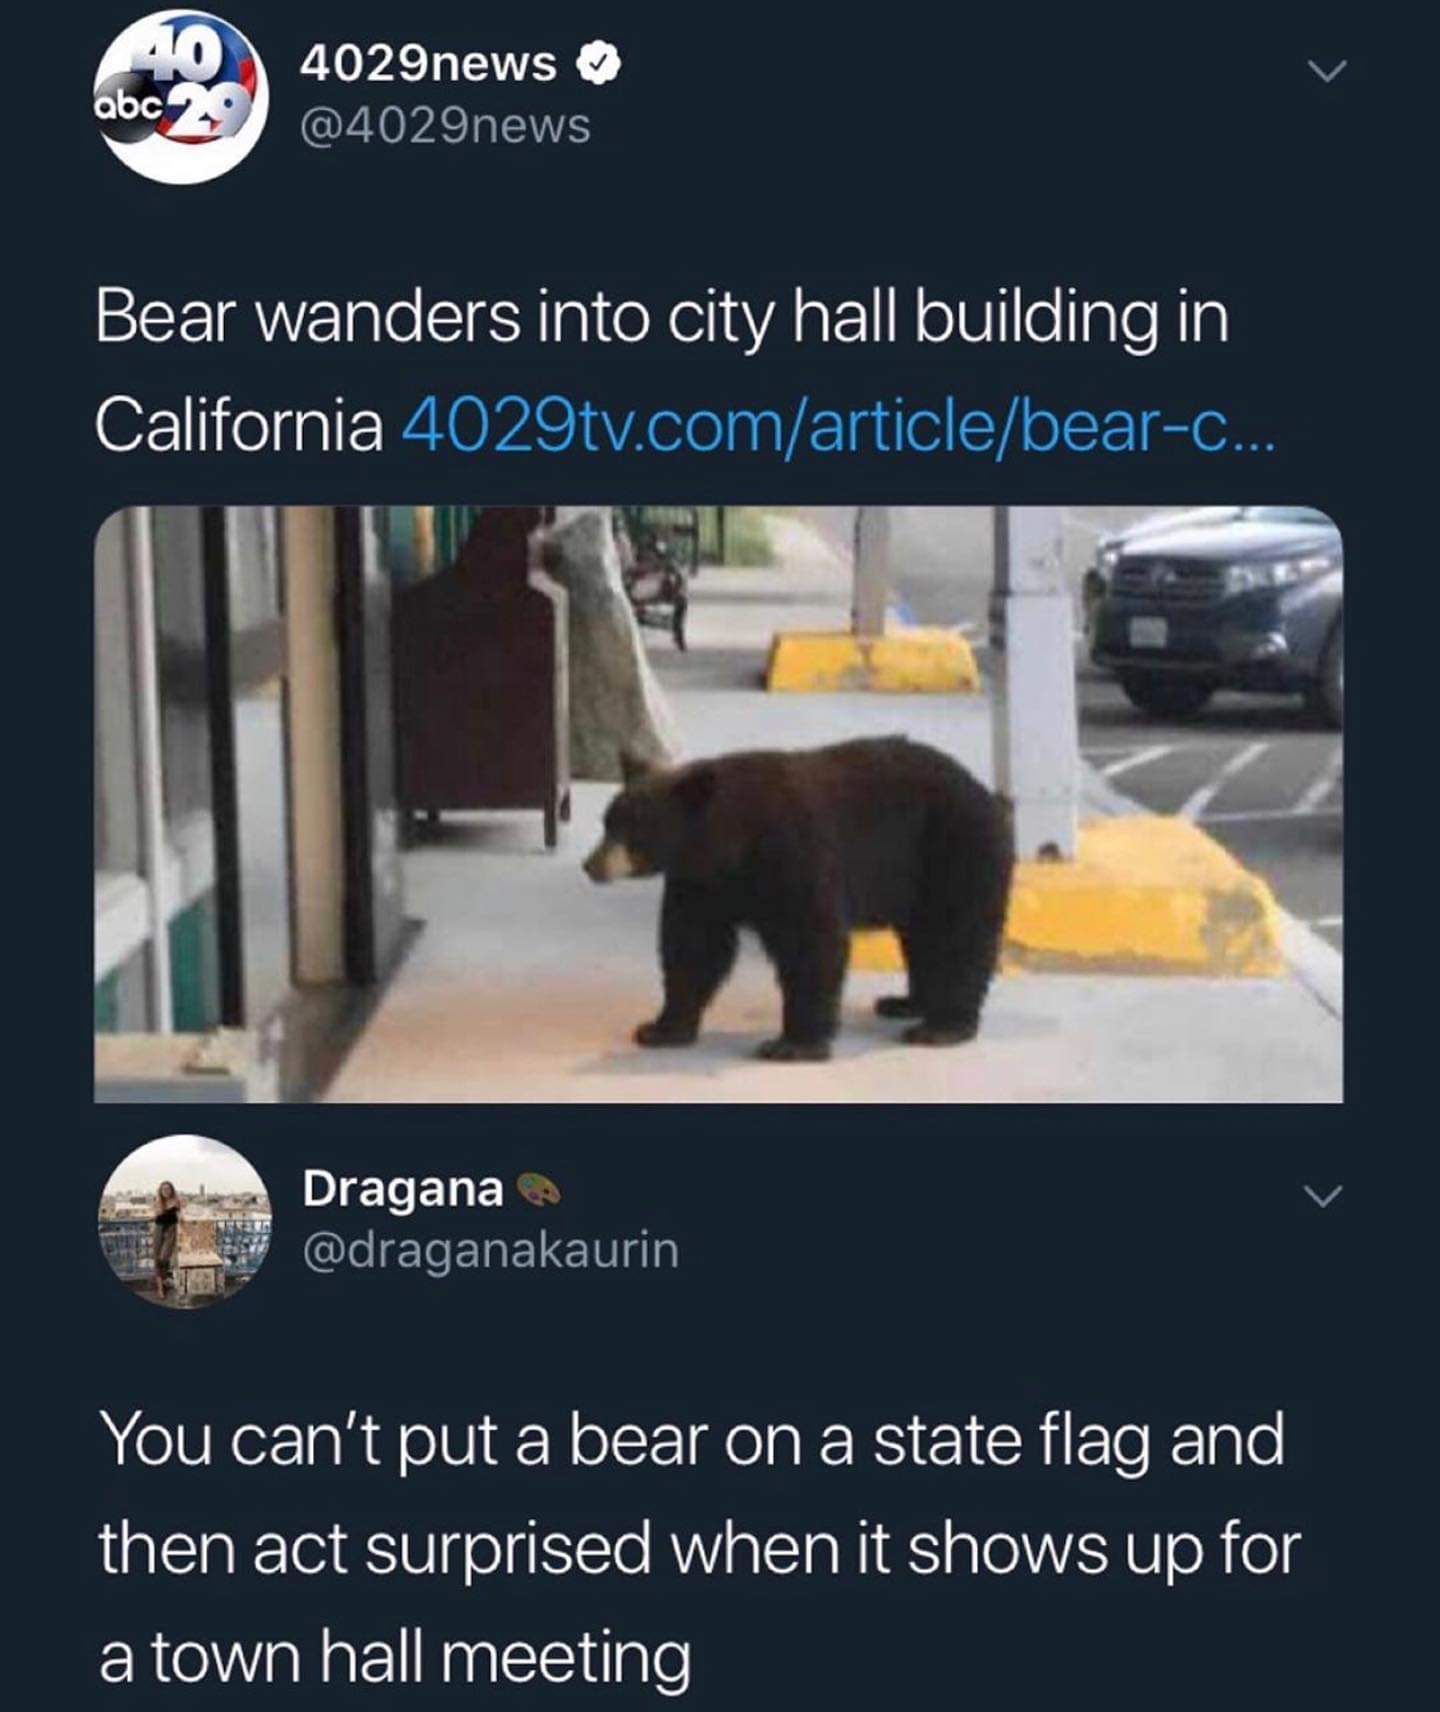 california bear city hall meme - abc 4029news Bear wanders into city hall building in California 4029tv.comarticlebearc... Dragana You can't put a bear on a state flag and then act surprised when it shows up for a town hall meeting